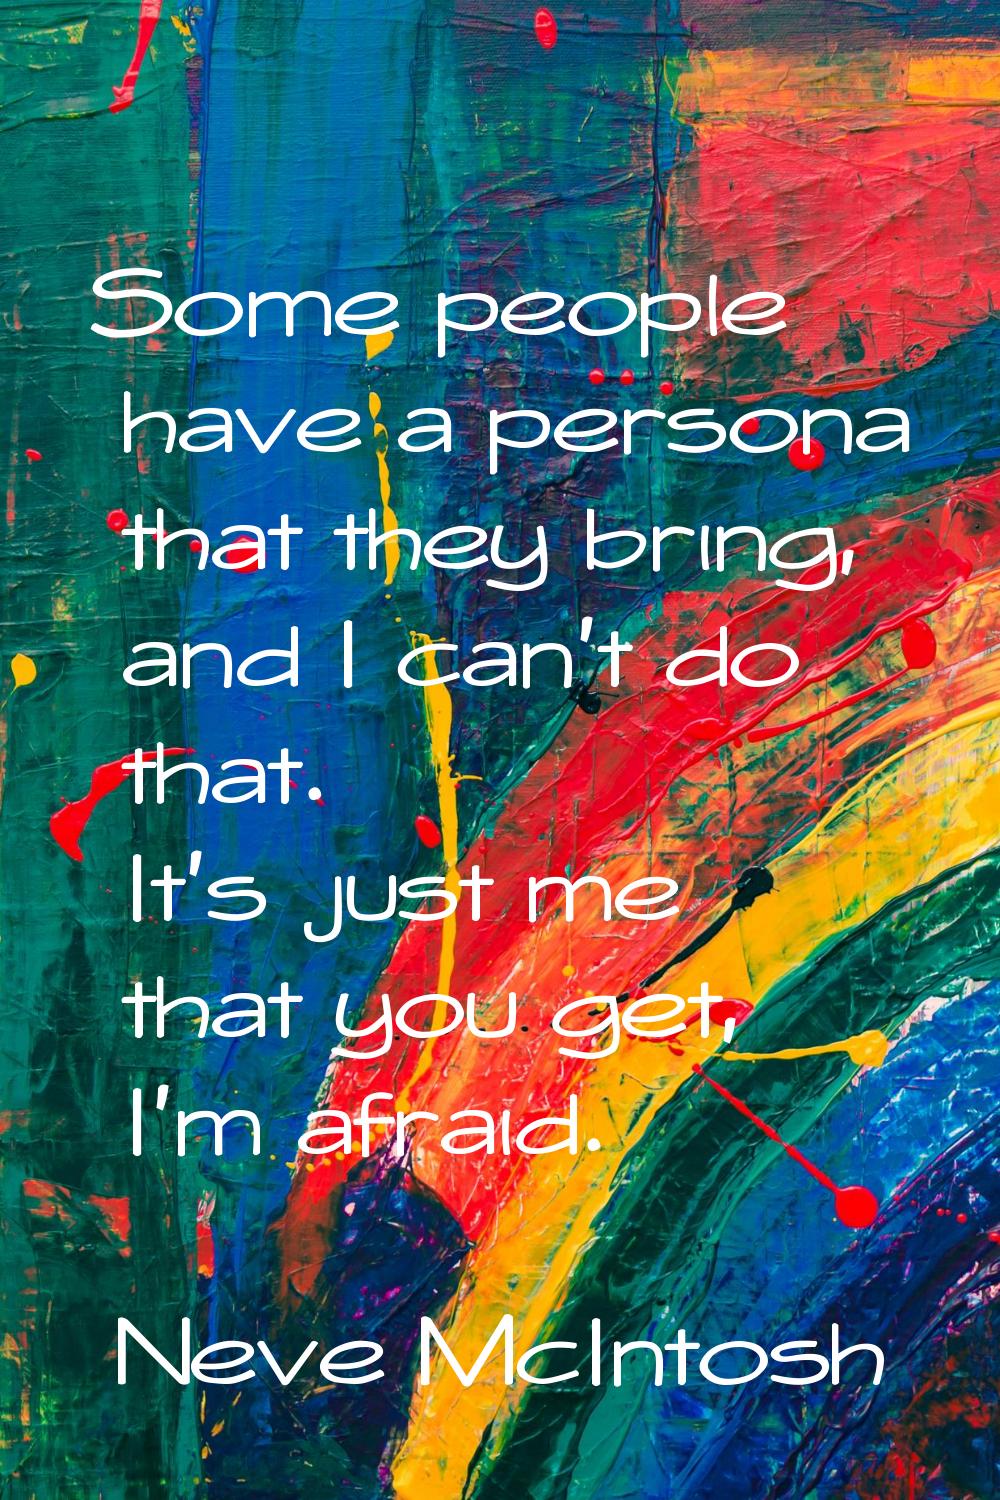 Some people have a persona that they bring, and I can't do that. It's just me that you get, I'm afr